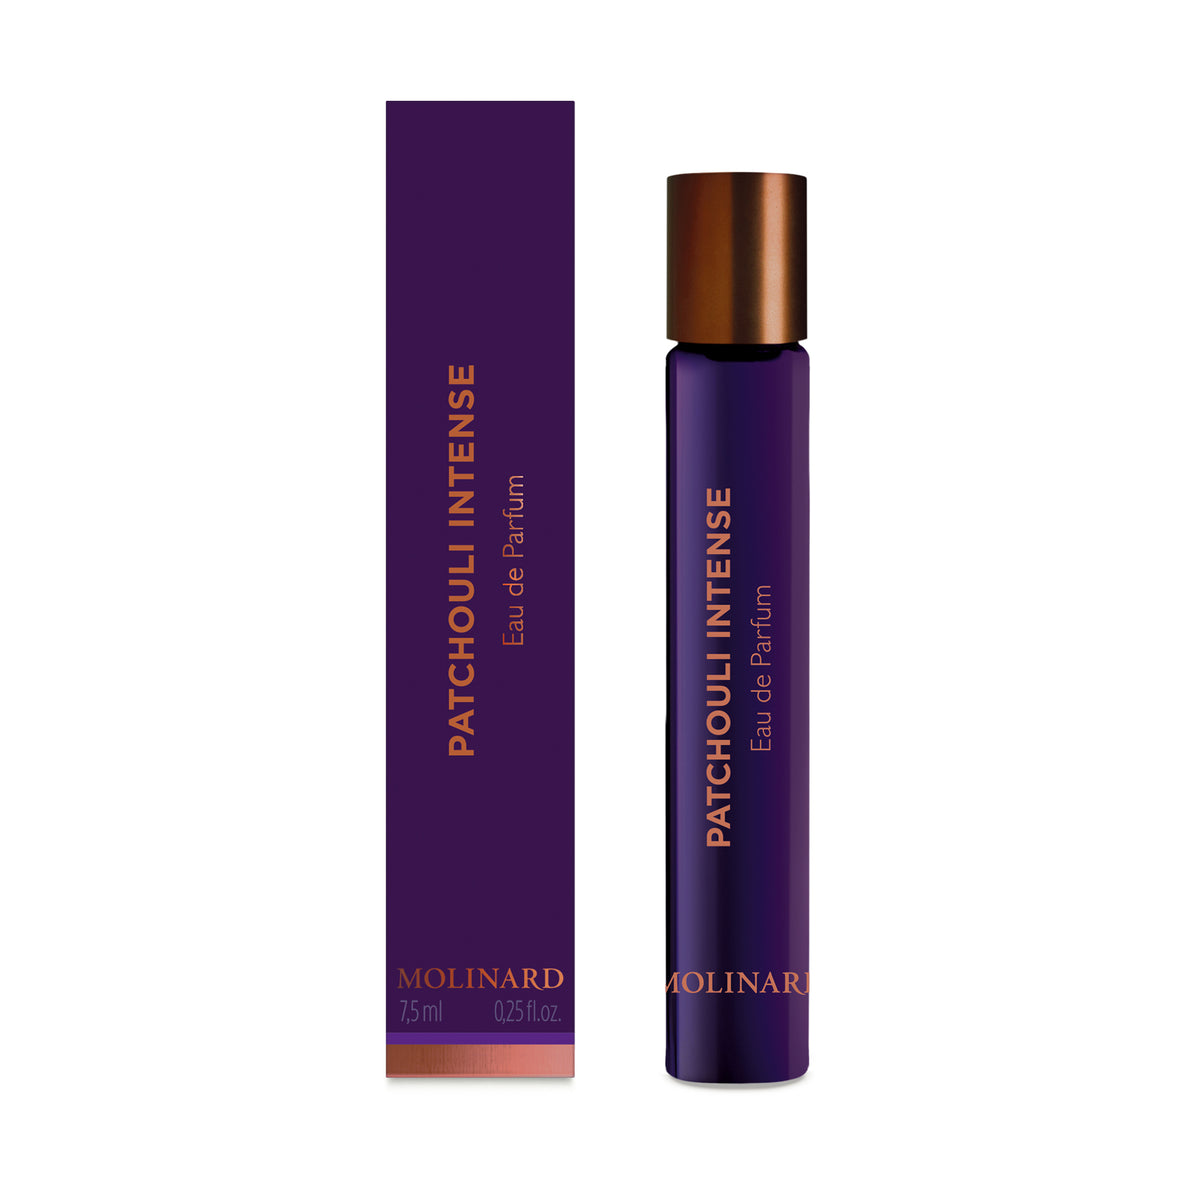 Roll-on Patchouli Intense